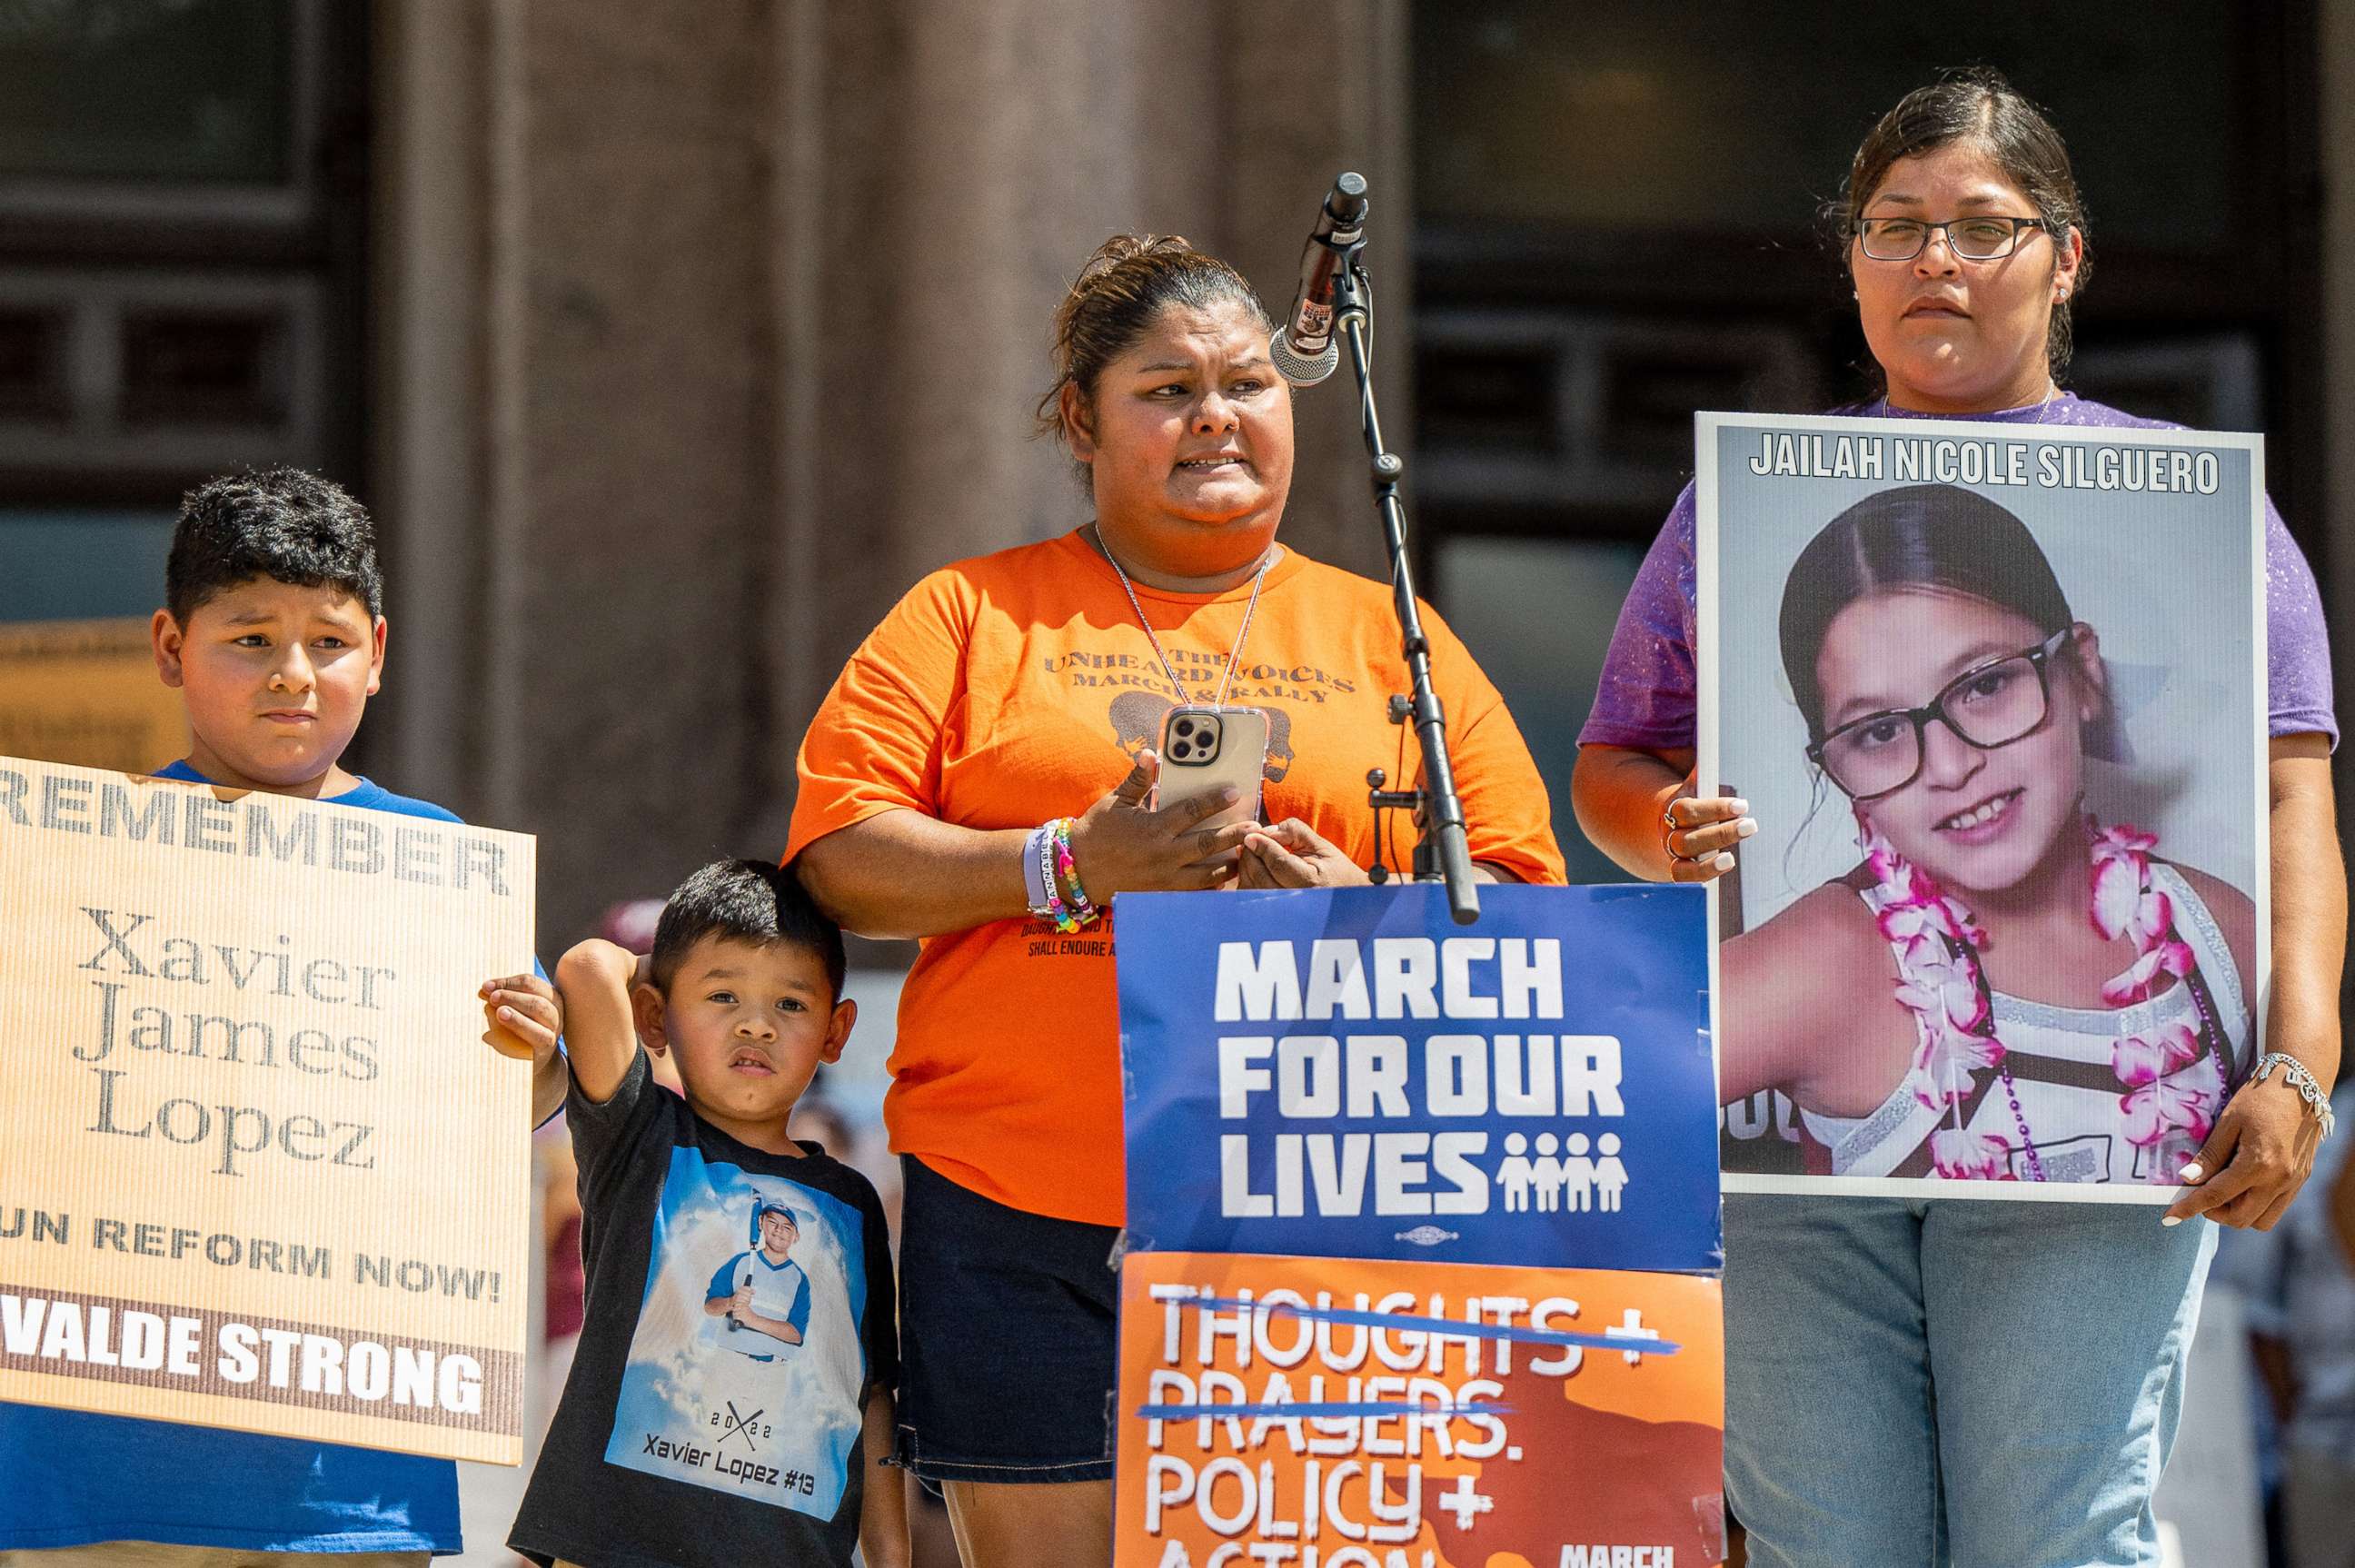 PHOTO: The Lopez and Silguero families speak about their children, who were murdered during the mass shooting at Robb Elementary School, during a March For Our Lives rally on Aug. 27, 2022 in Austin, Texas.